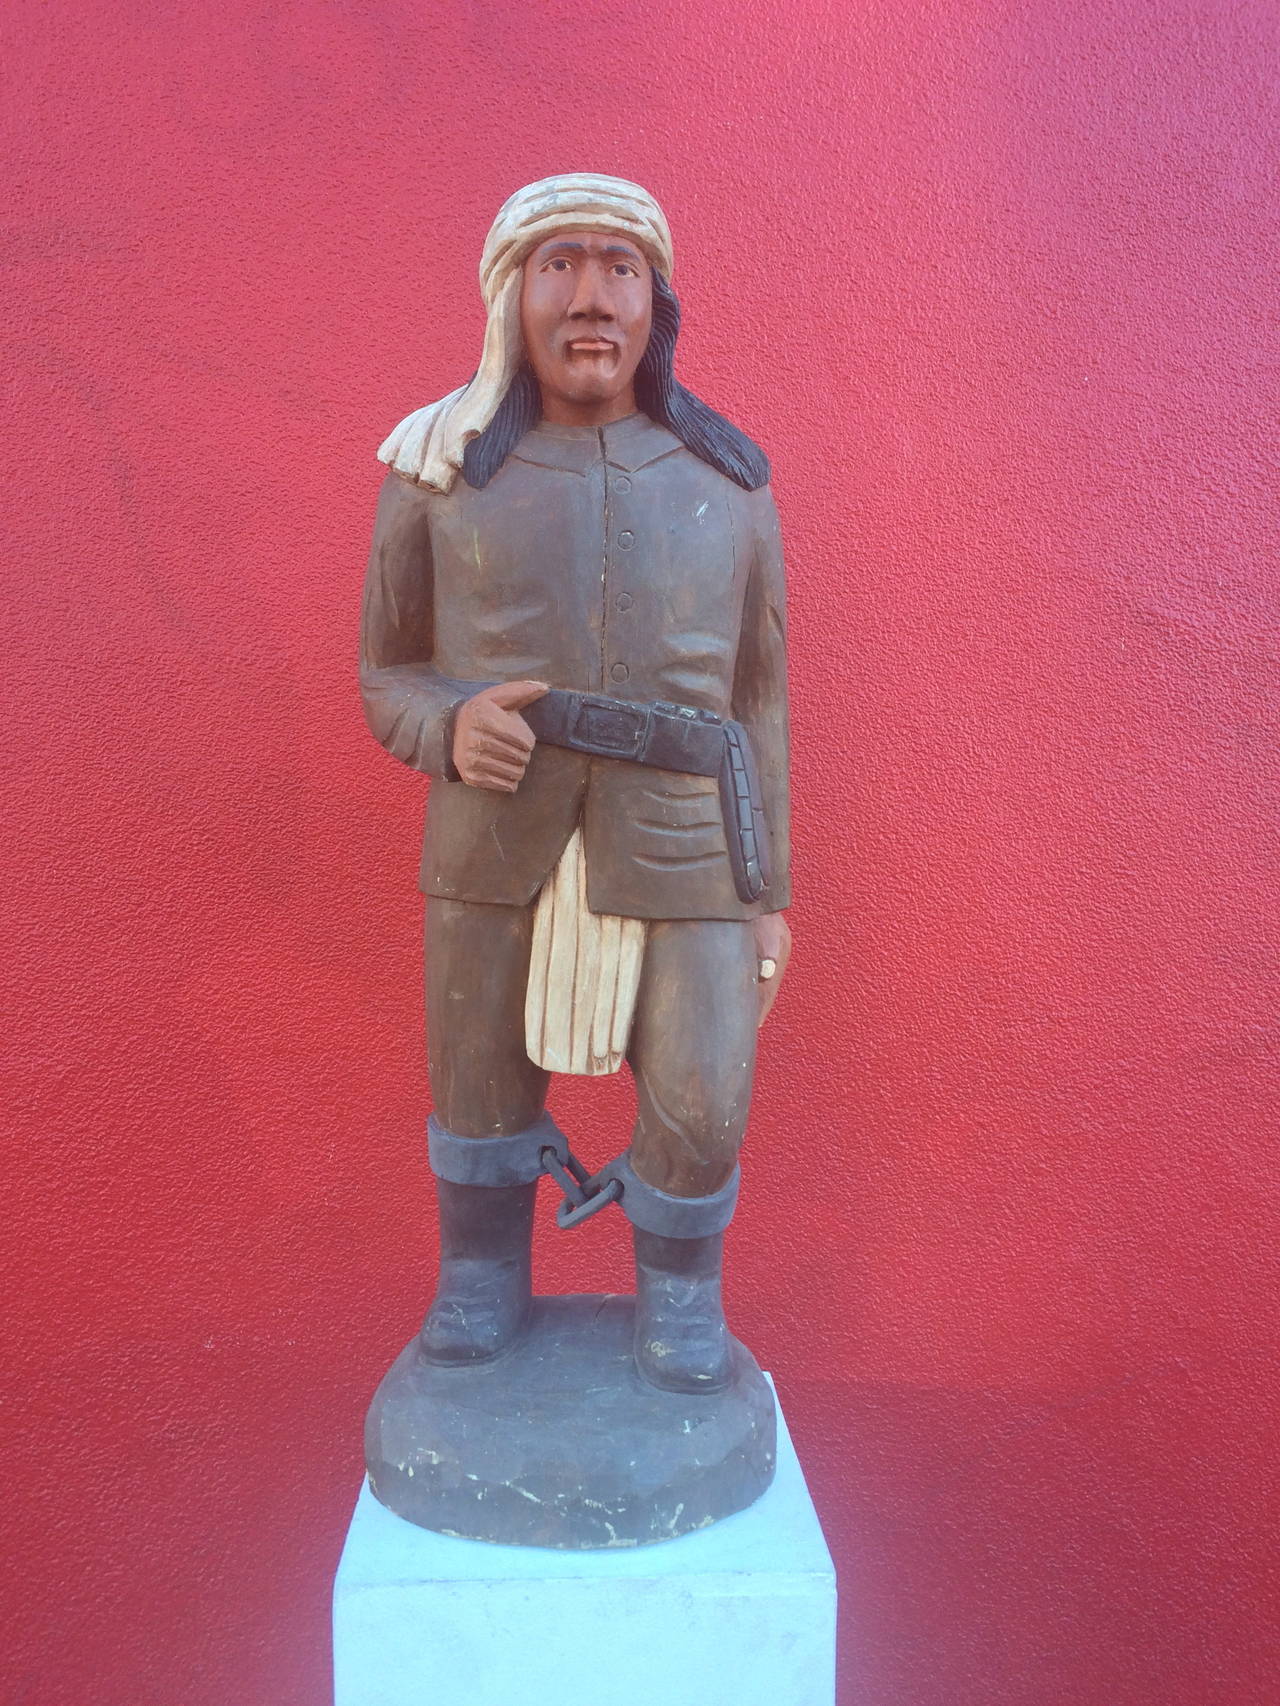 Geronimo in Chains
circa 1967
carved and painted wood
Some paint loss and cracking due to temperature changes